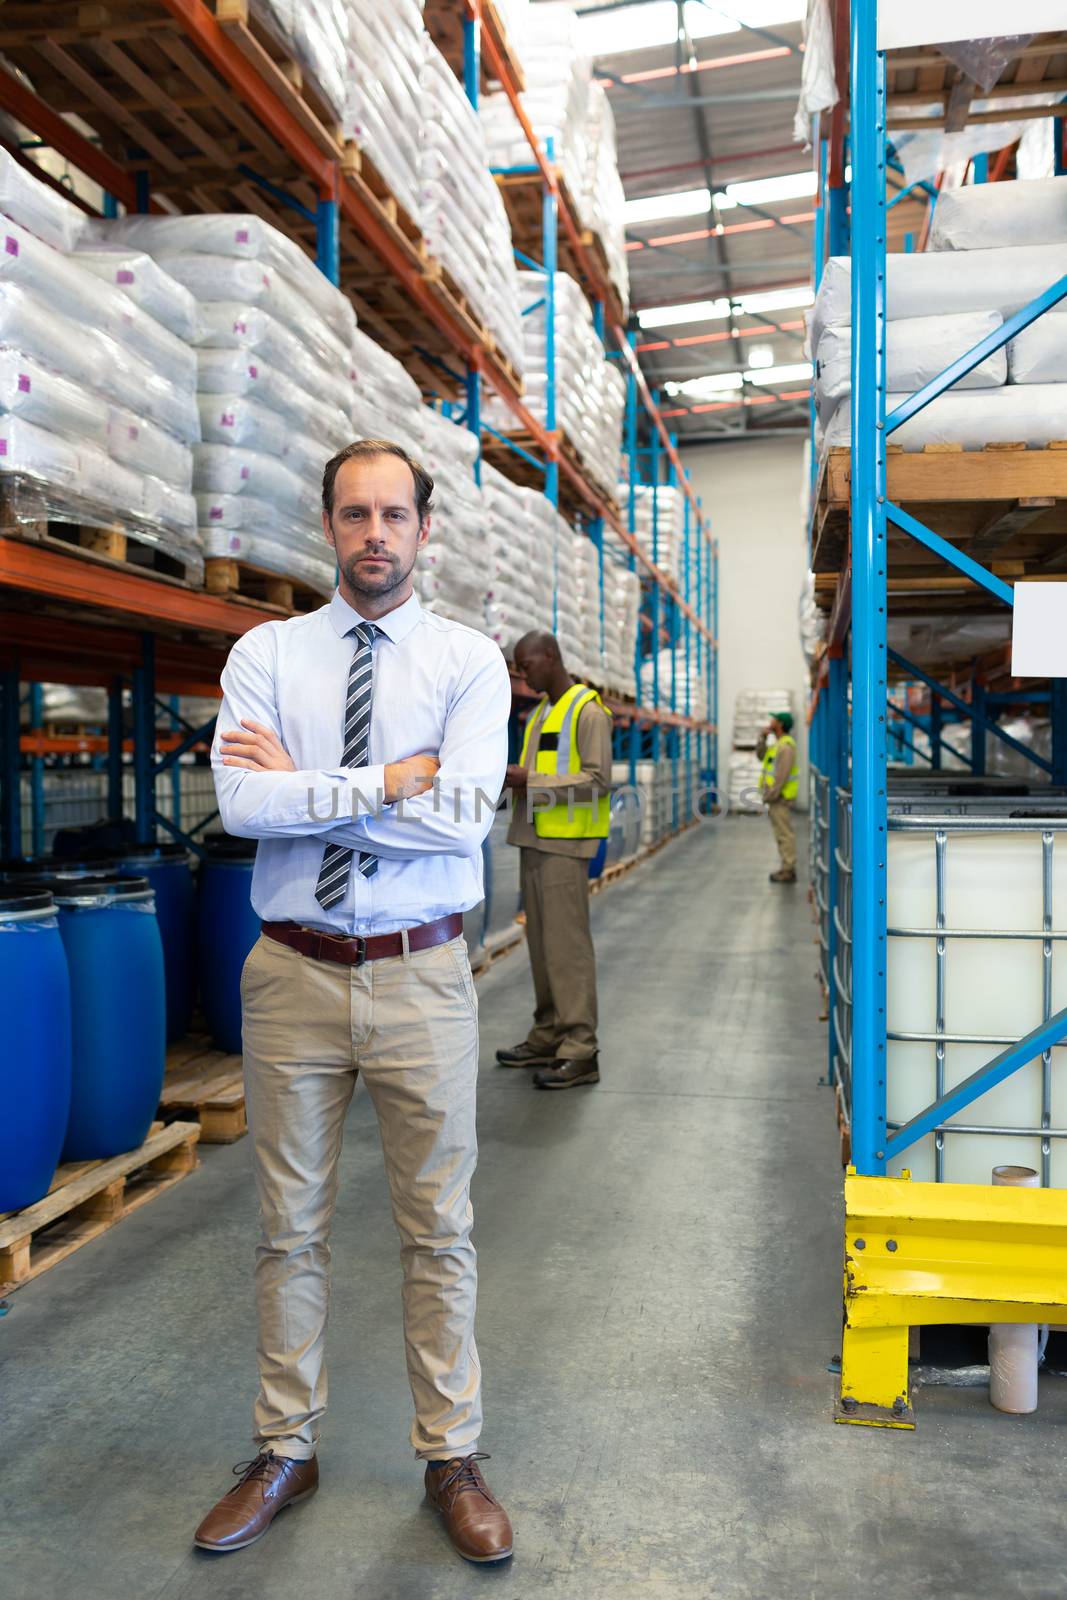 Male supervisor standing with arms crossed and looking at camera in warehouse by Wavebreakmedia